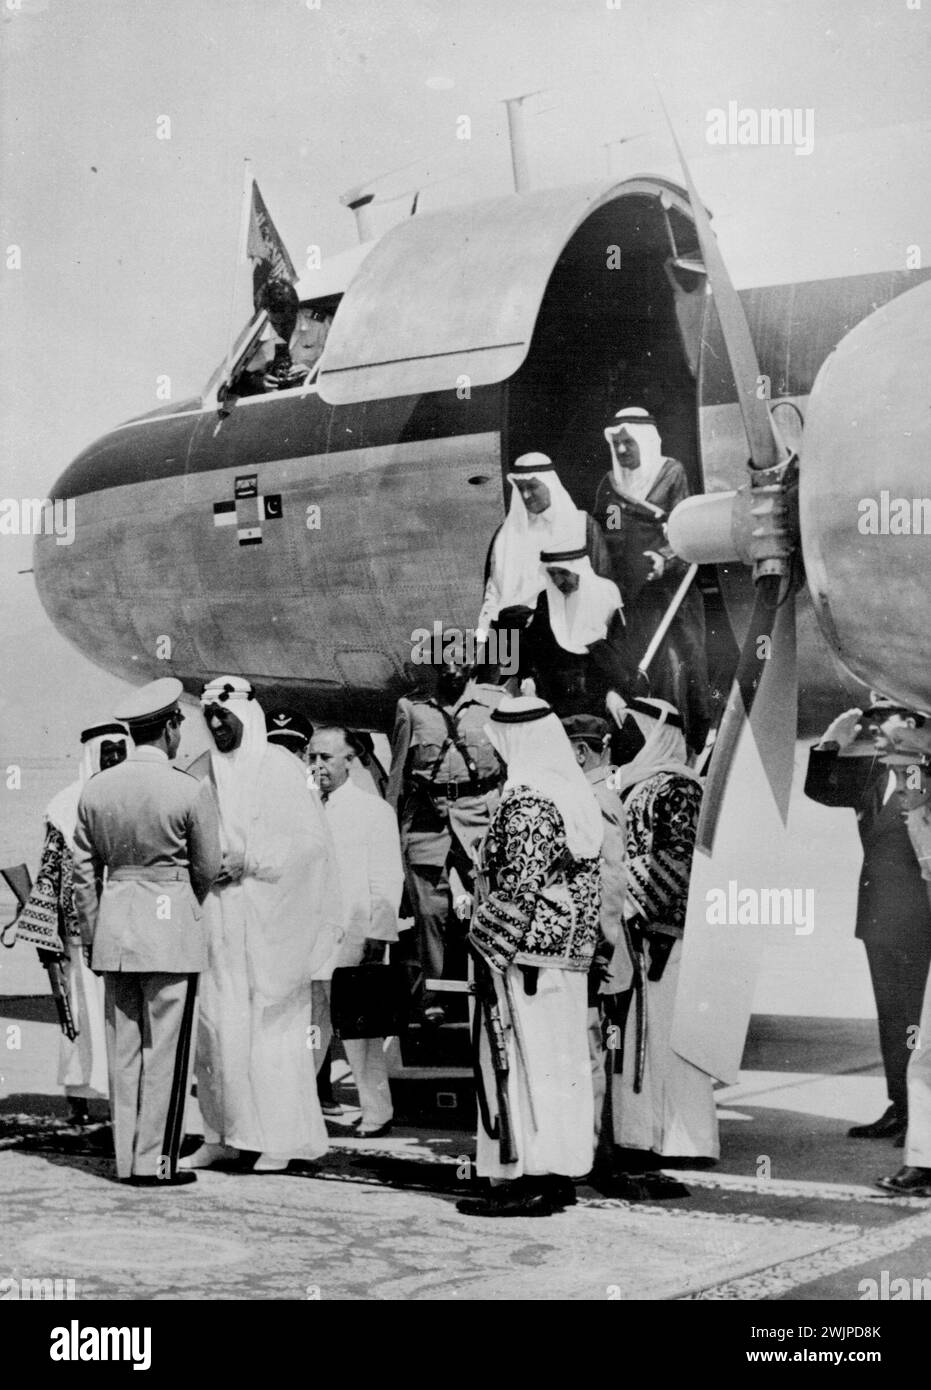 King Saud Visits Persia -- The Shah of Persia, Reza Pahlevi (back to camera) greets King Saud of Arabia on his arrival at Mehrabad airport, Teheran, on a three-day state visit to Persia. August 12, 1955. (Photo by United Press photo). Stock Photo